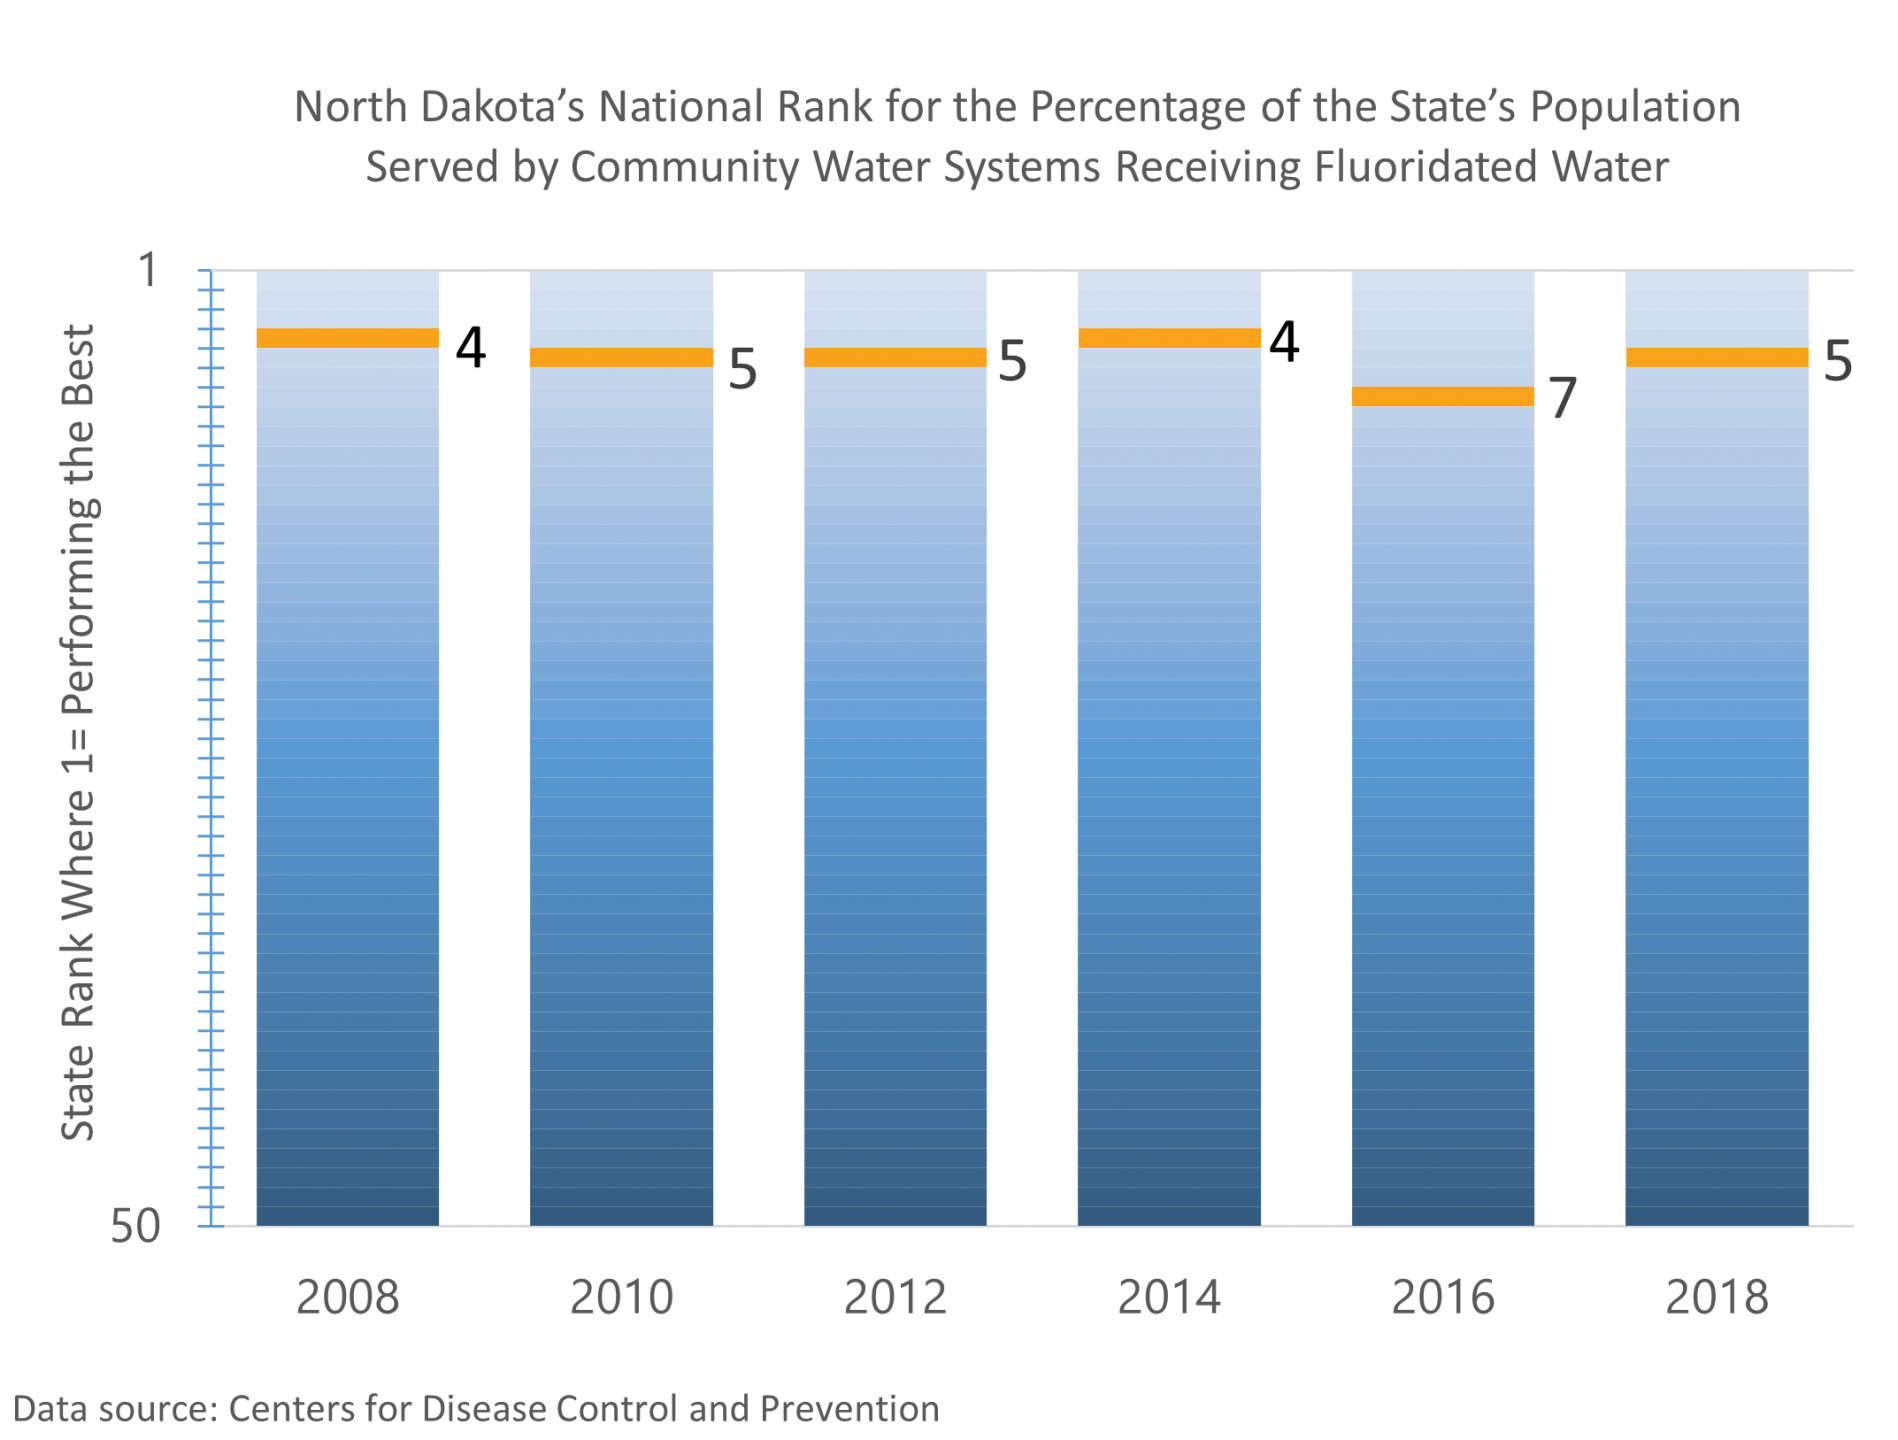 ND 's national rank for the percentage of the states population served by community water systems receiving fluridated water